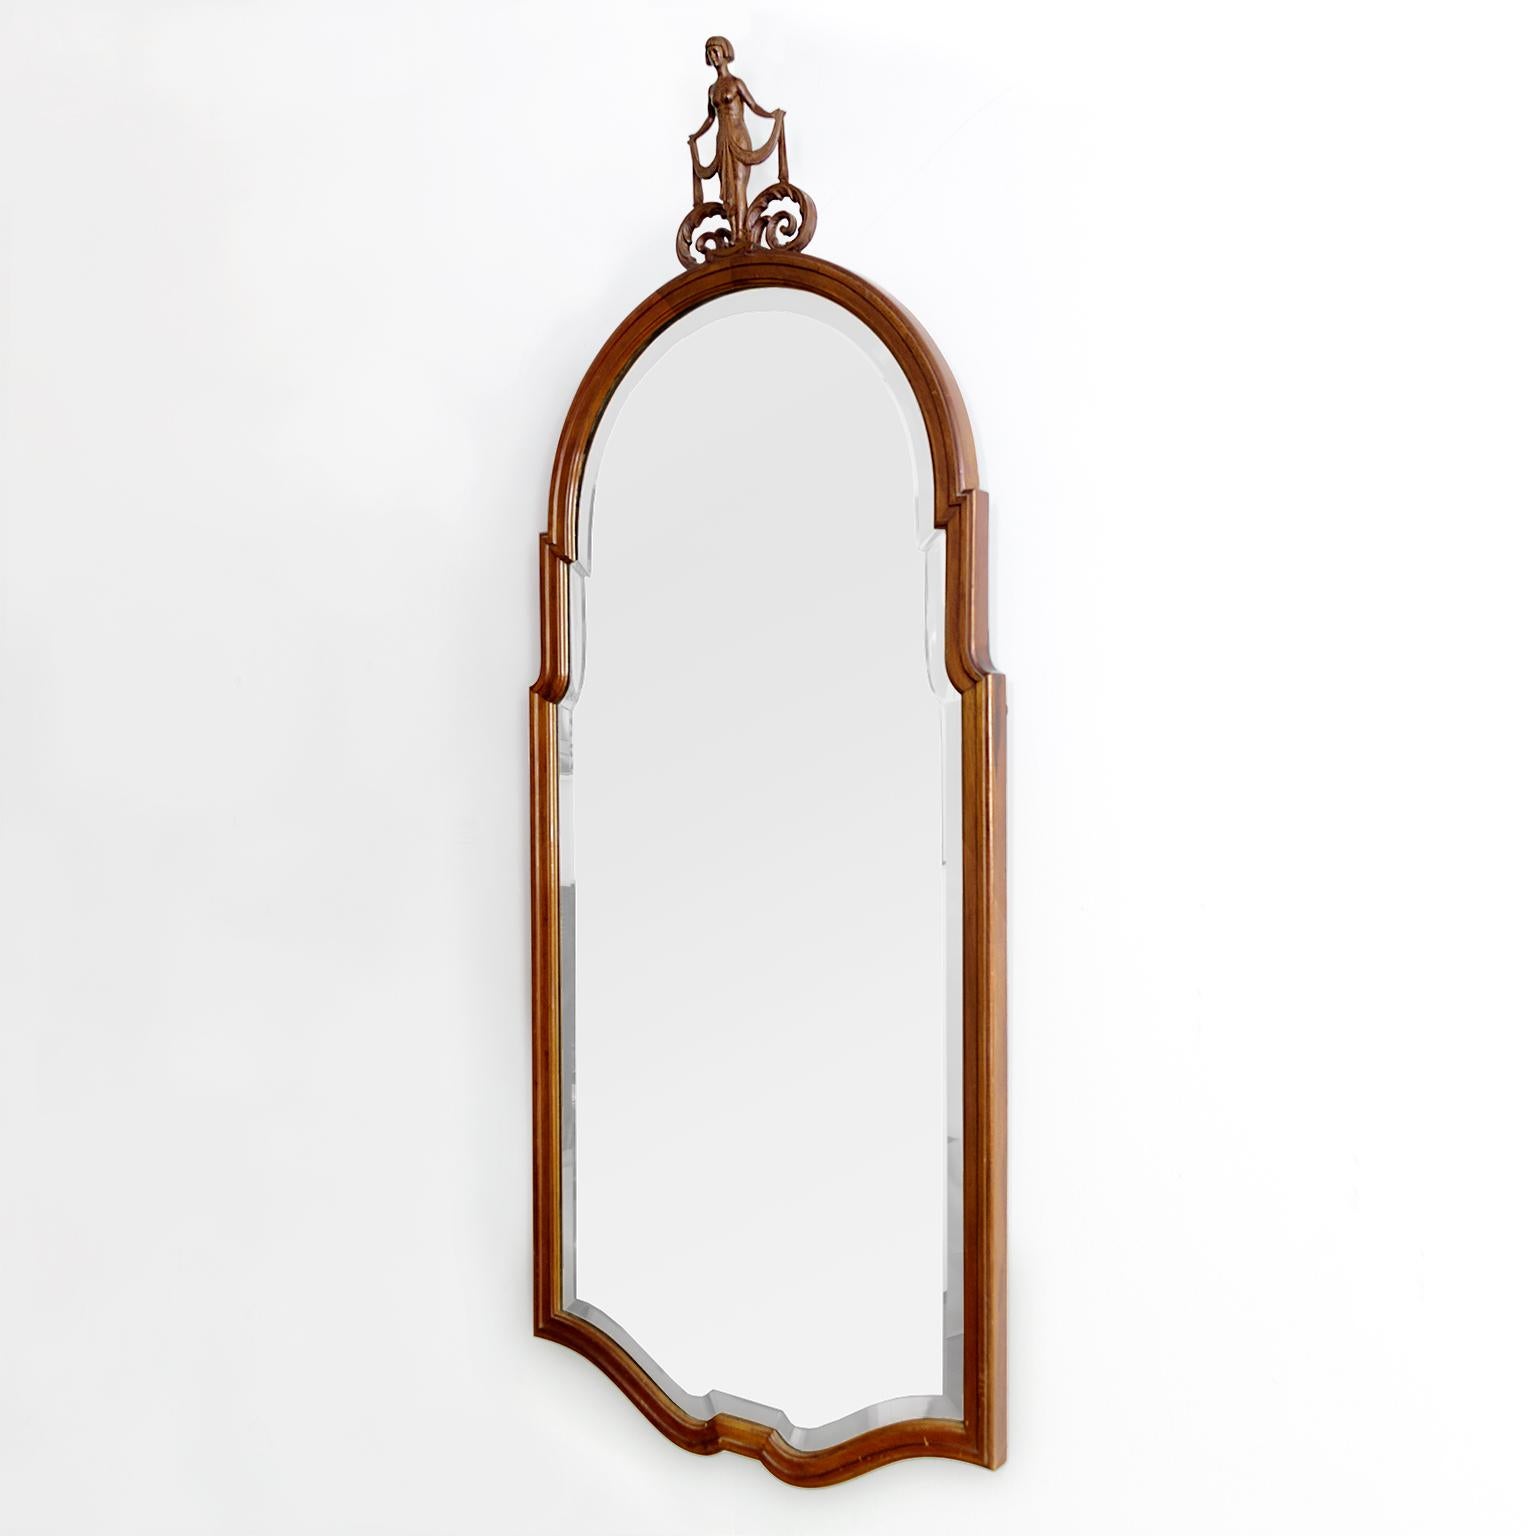 Scandinavian Modern Swedish Grace Carved Mahogany Mirror Topped With a Female, Circa, 1920-30